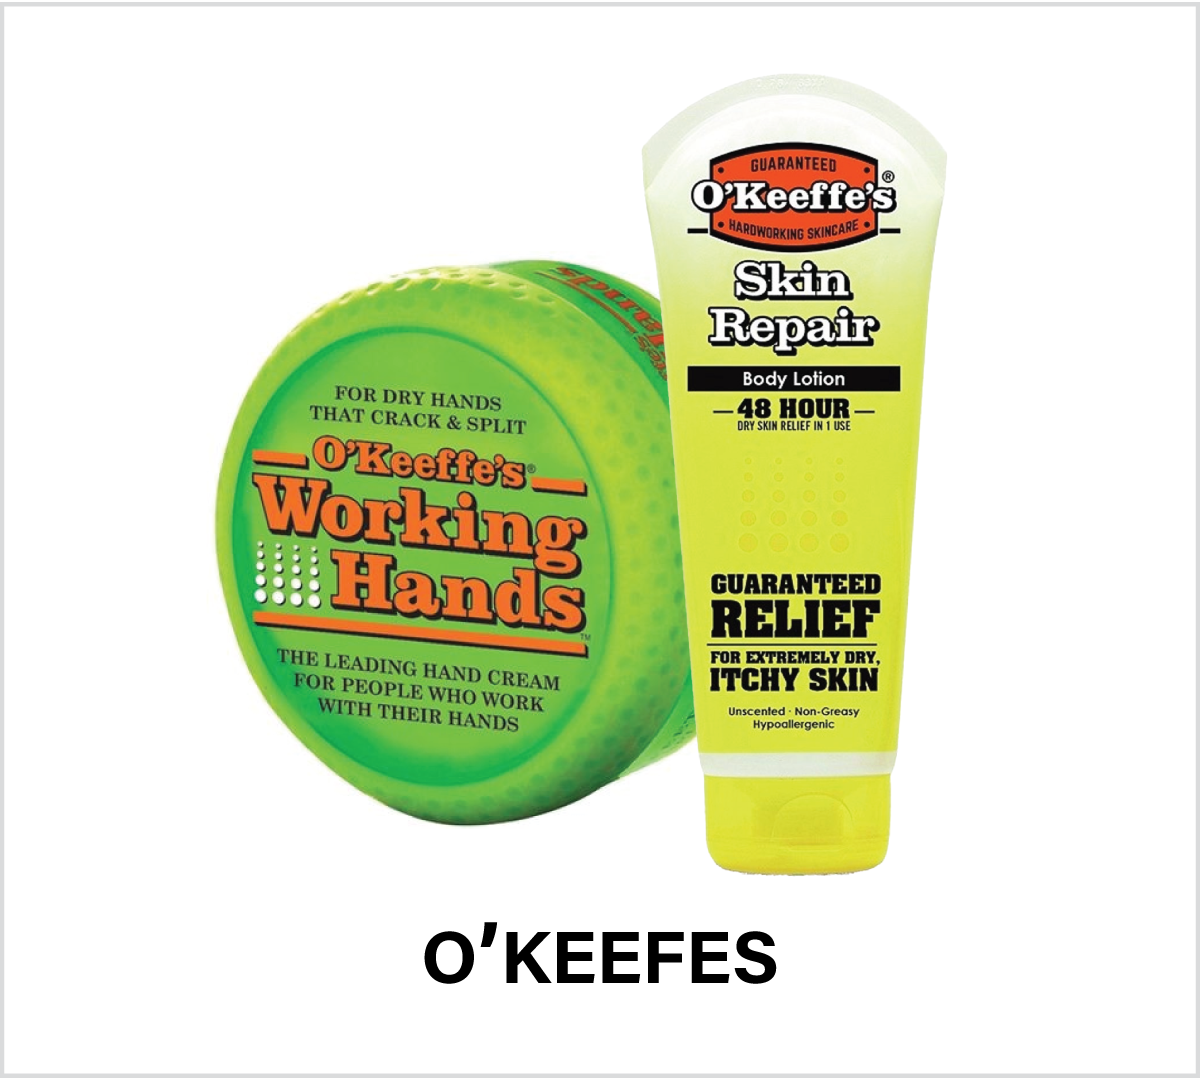 Winter Safety_O'keefes